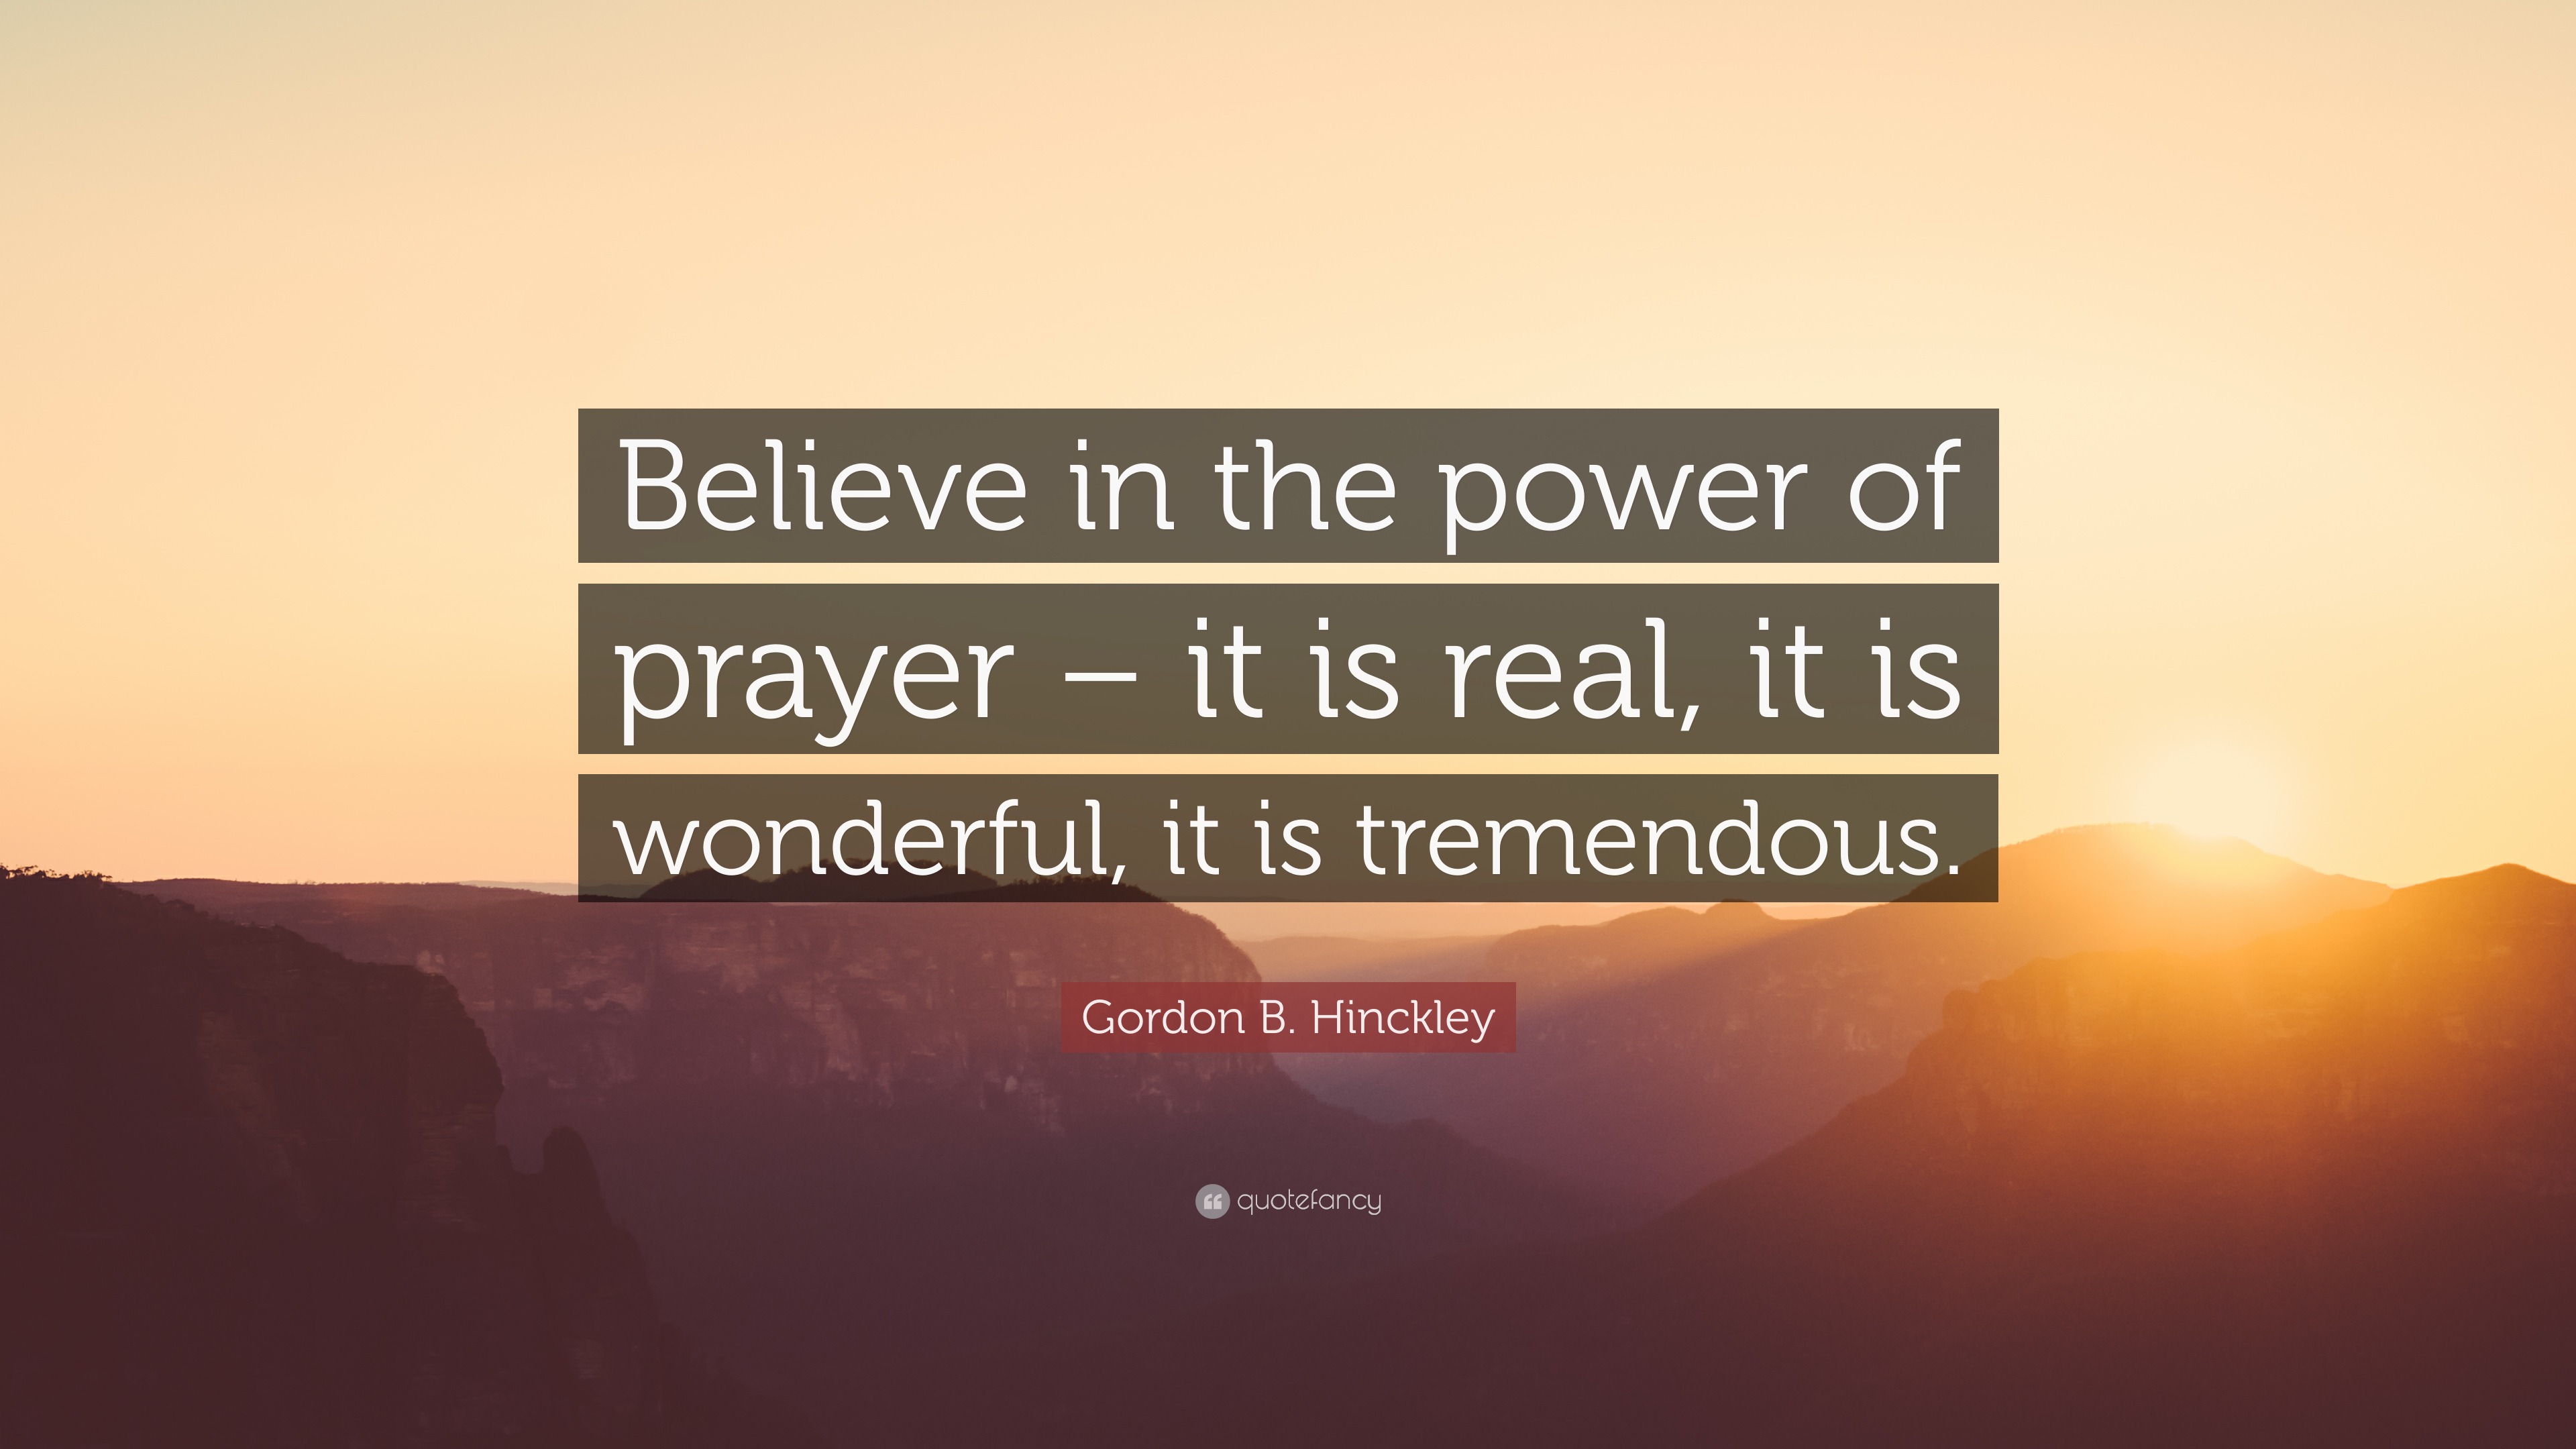 Gordon B. Hinckley Quote: “Believe in the power of prayer – it is real ...
